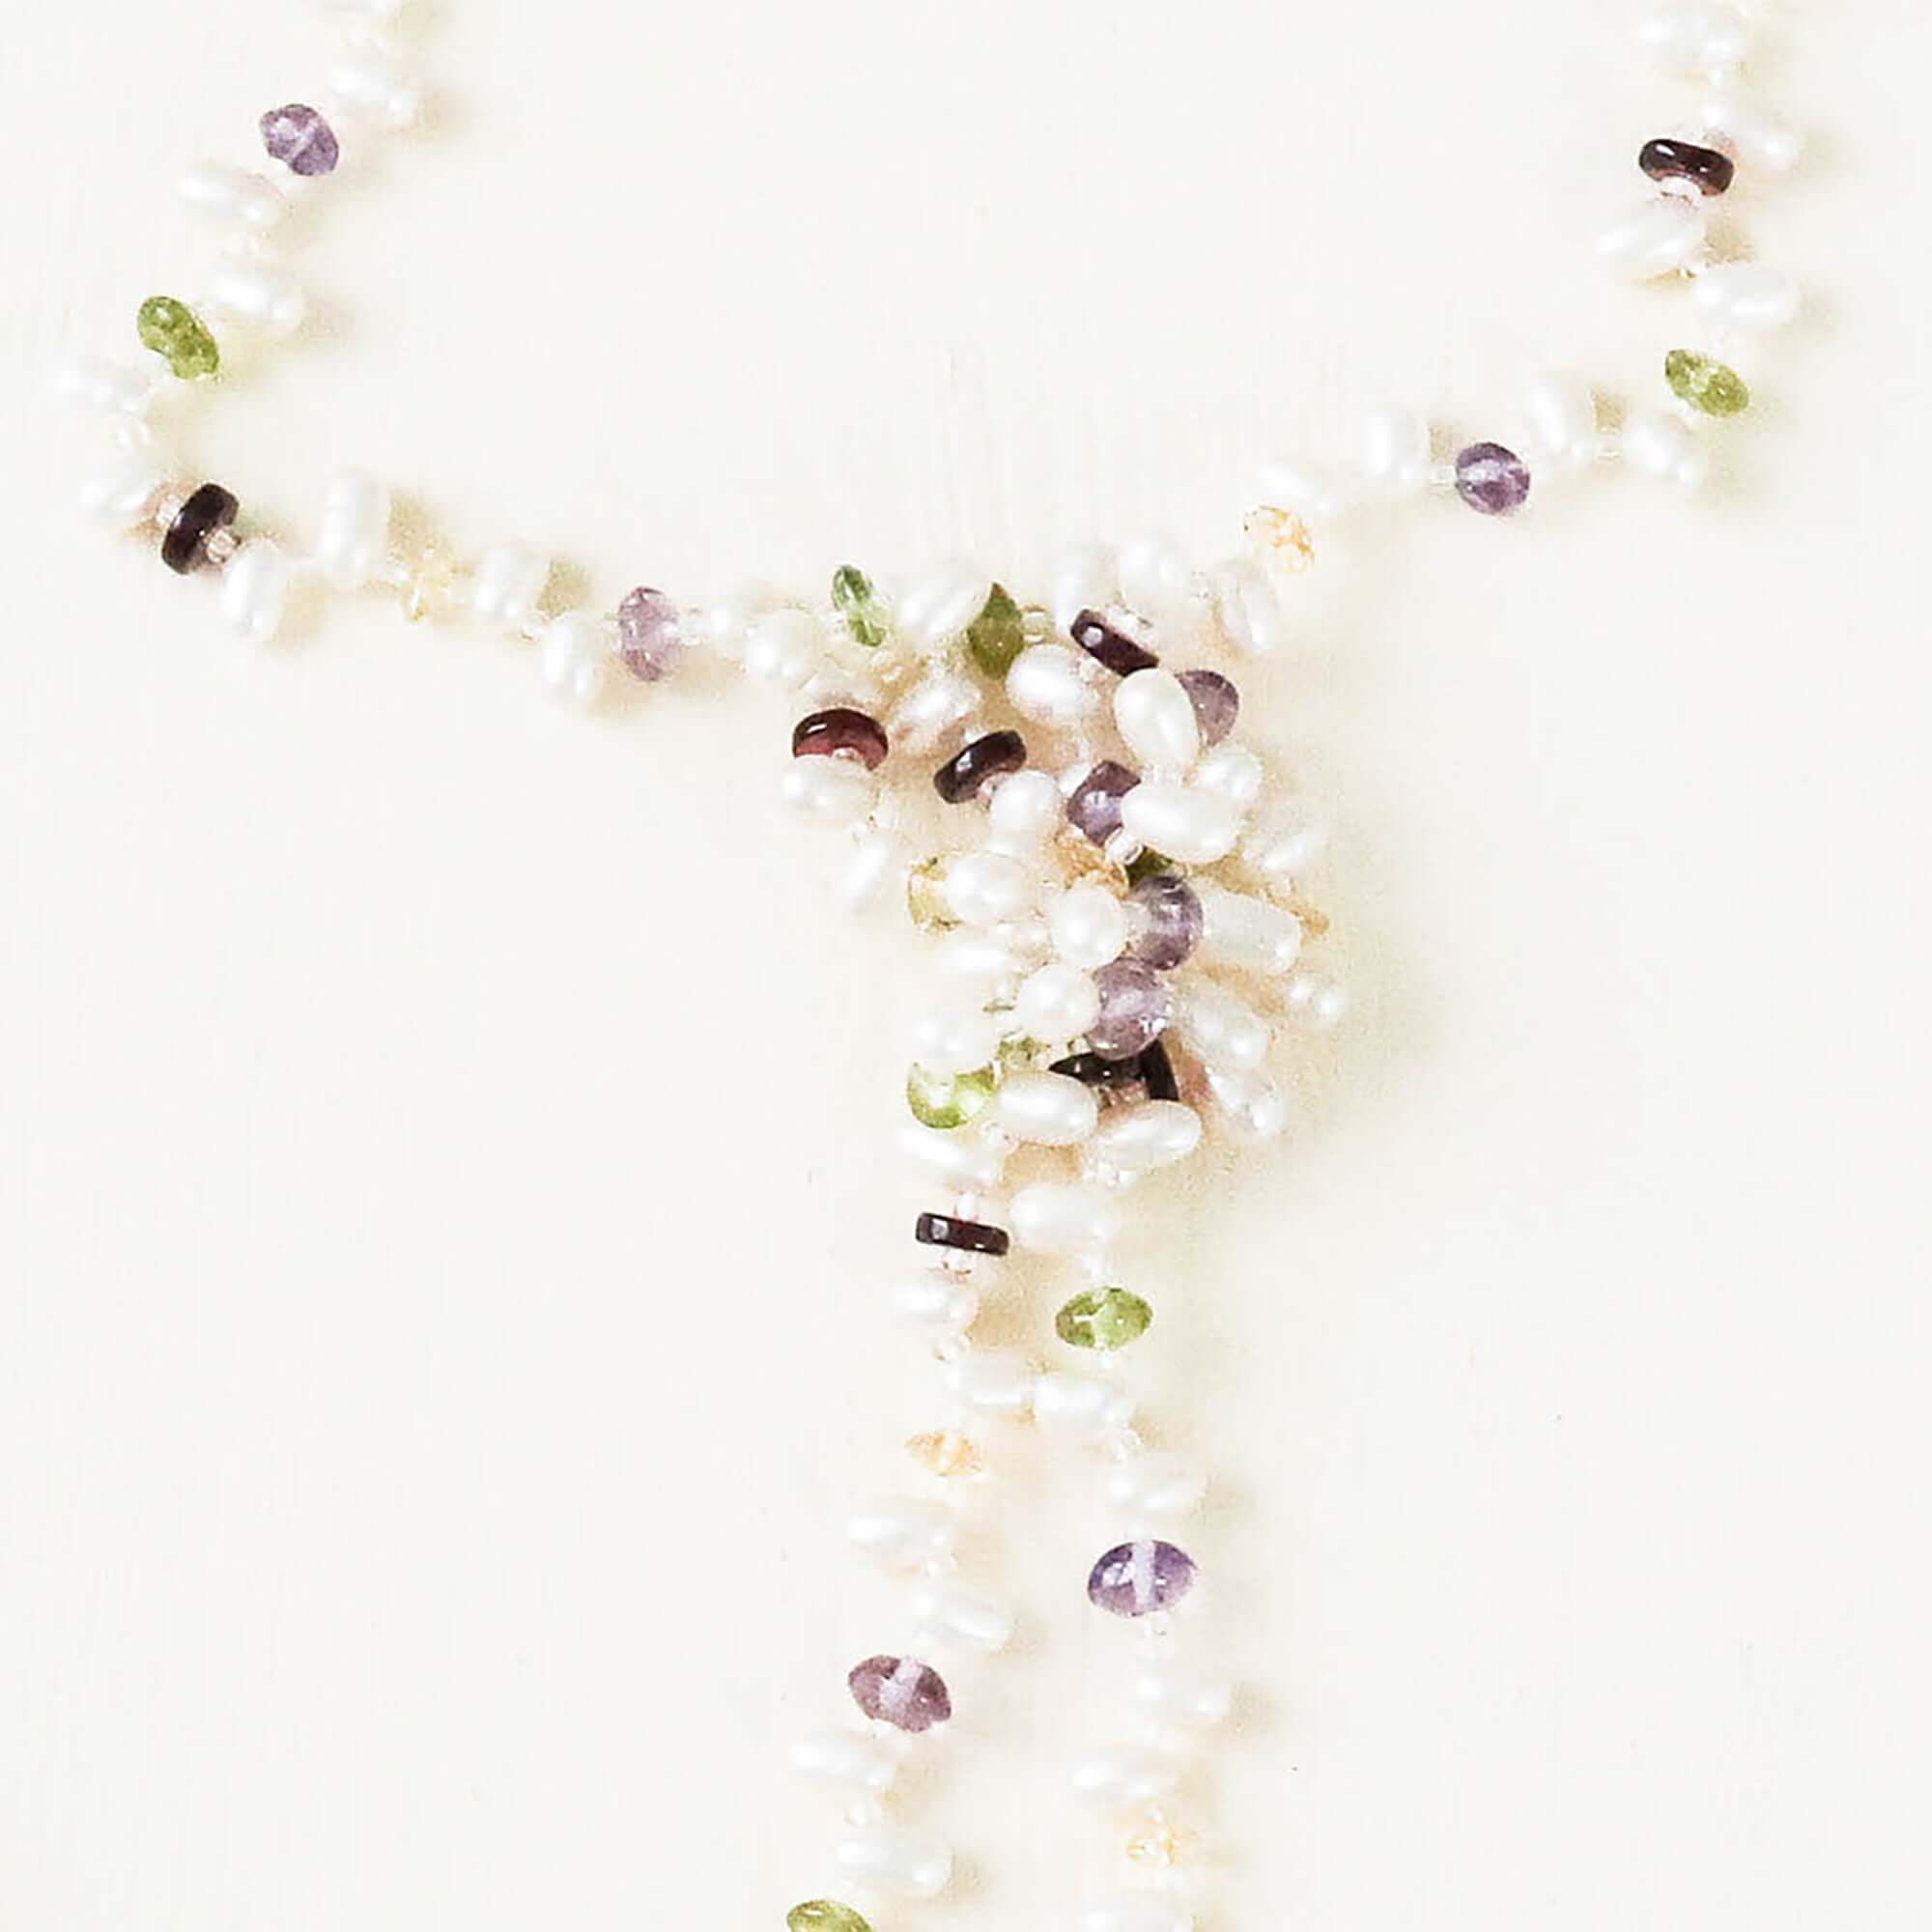 Lariat necklace with 45 inches of freshwater bead pearls and multi-colored gemstones, including garnet, peridot, amethyst, and champagne quartz